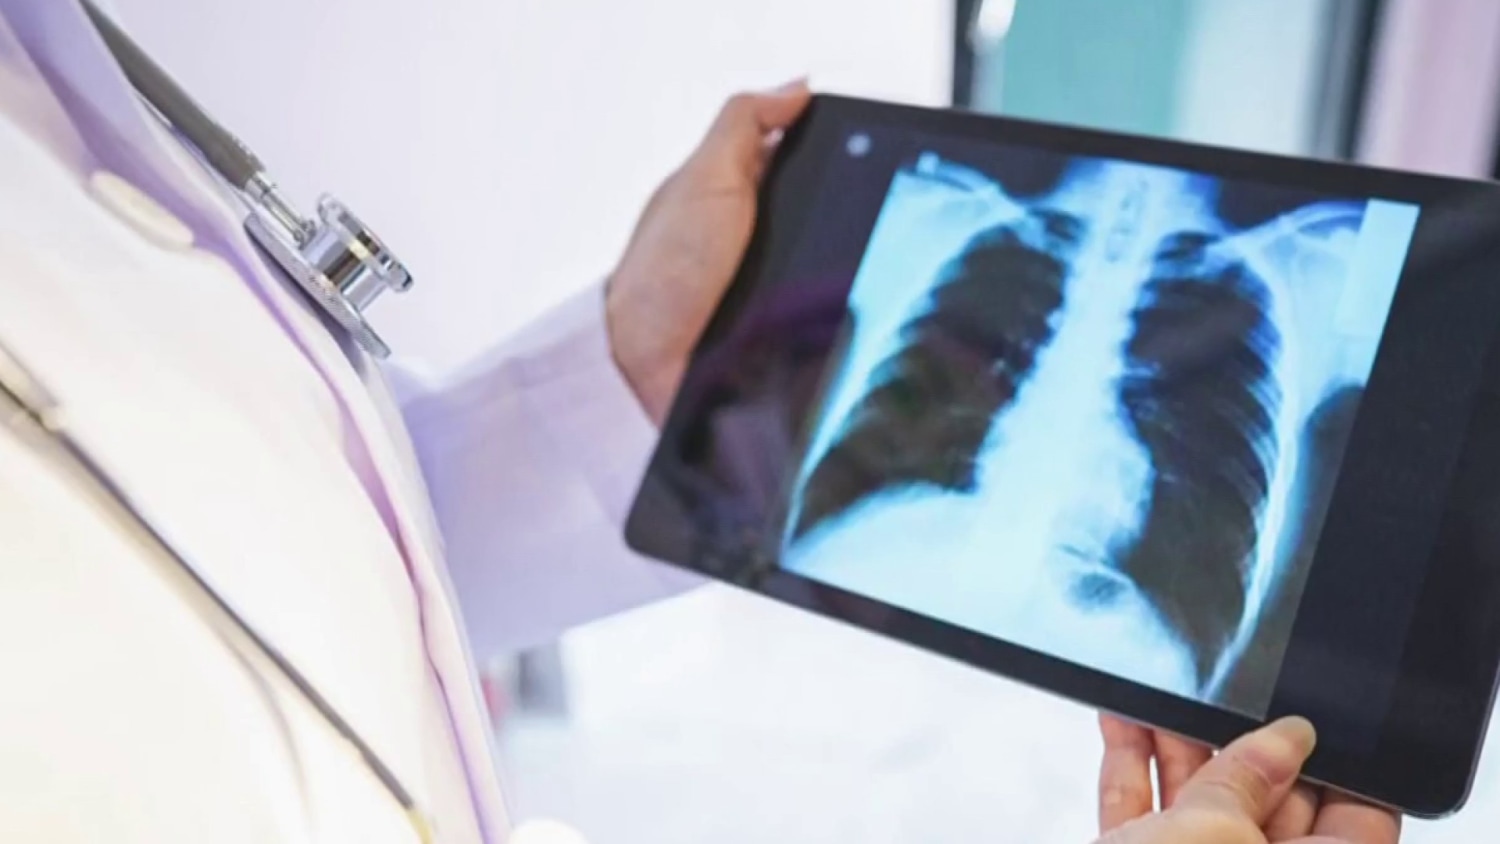 Promising new AI can detect early signs of lung cancer that doctors can't  see